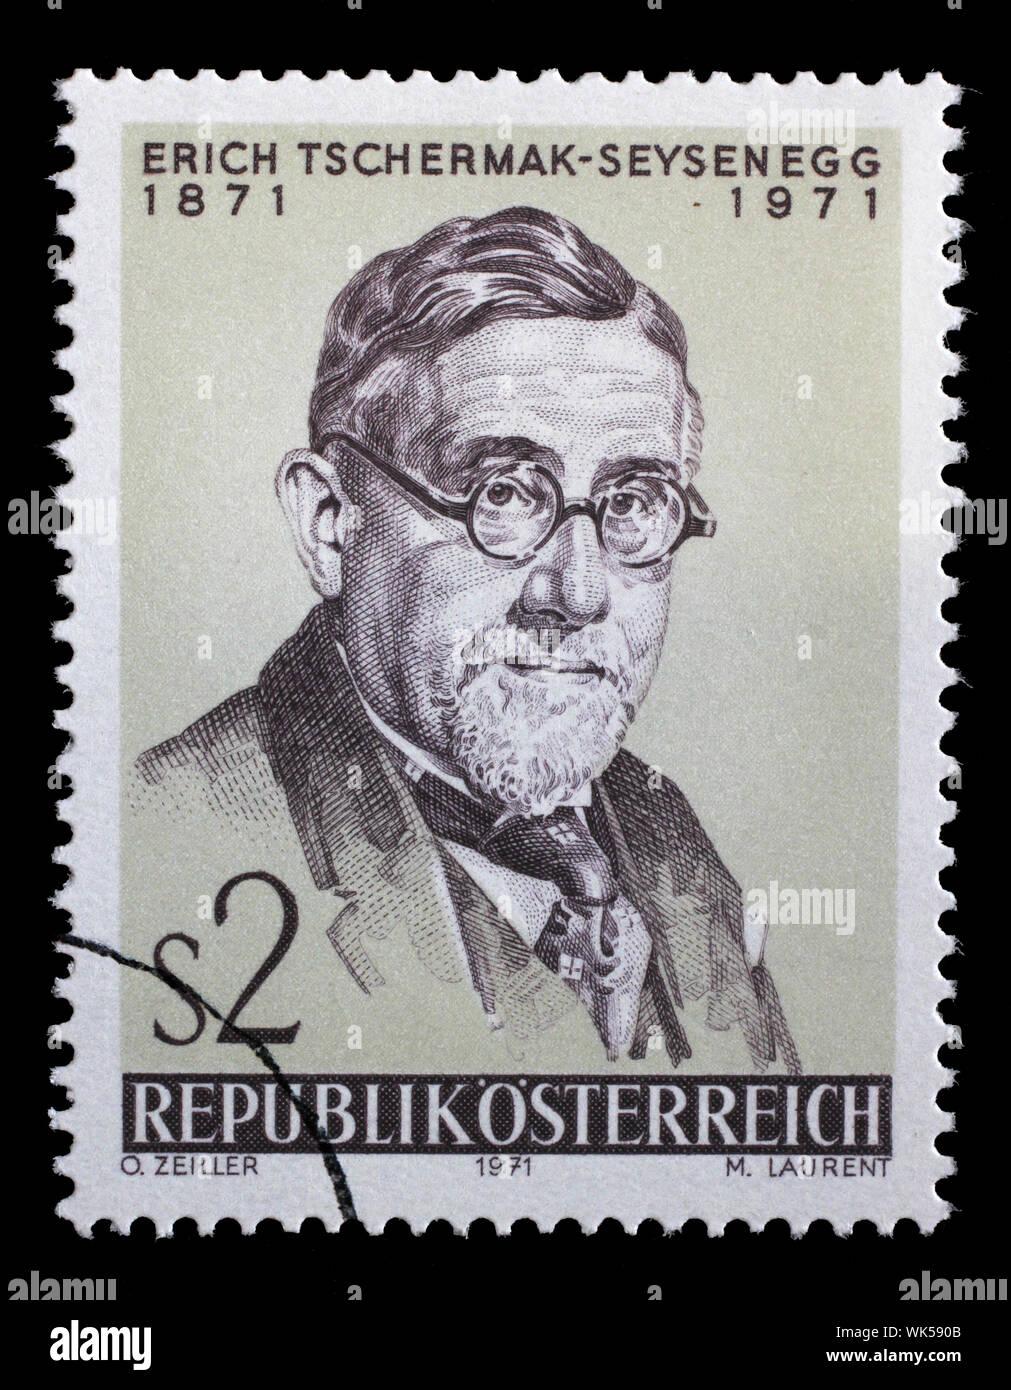 Stamp issued in the Austria shows Dr. Erich Tschermak-Seyseneggs, botanist, the 100th Anniversary of the Birth, circa 1971. Stock Photo